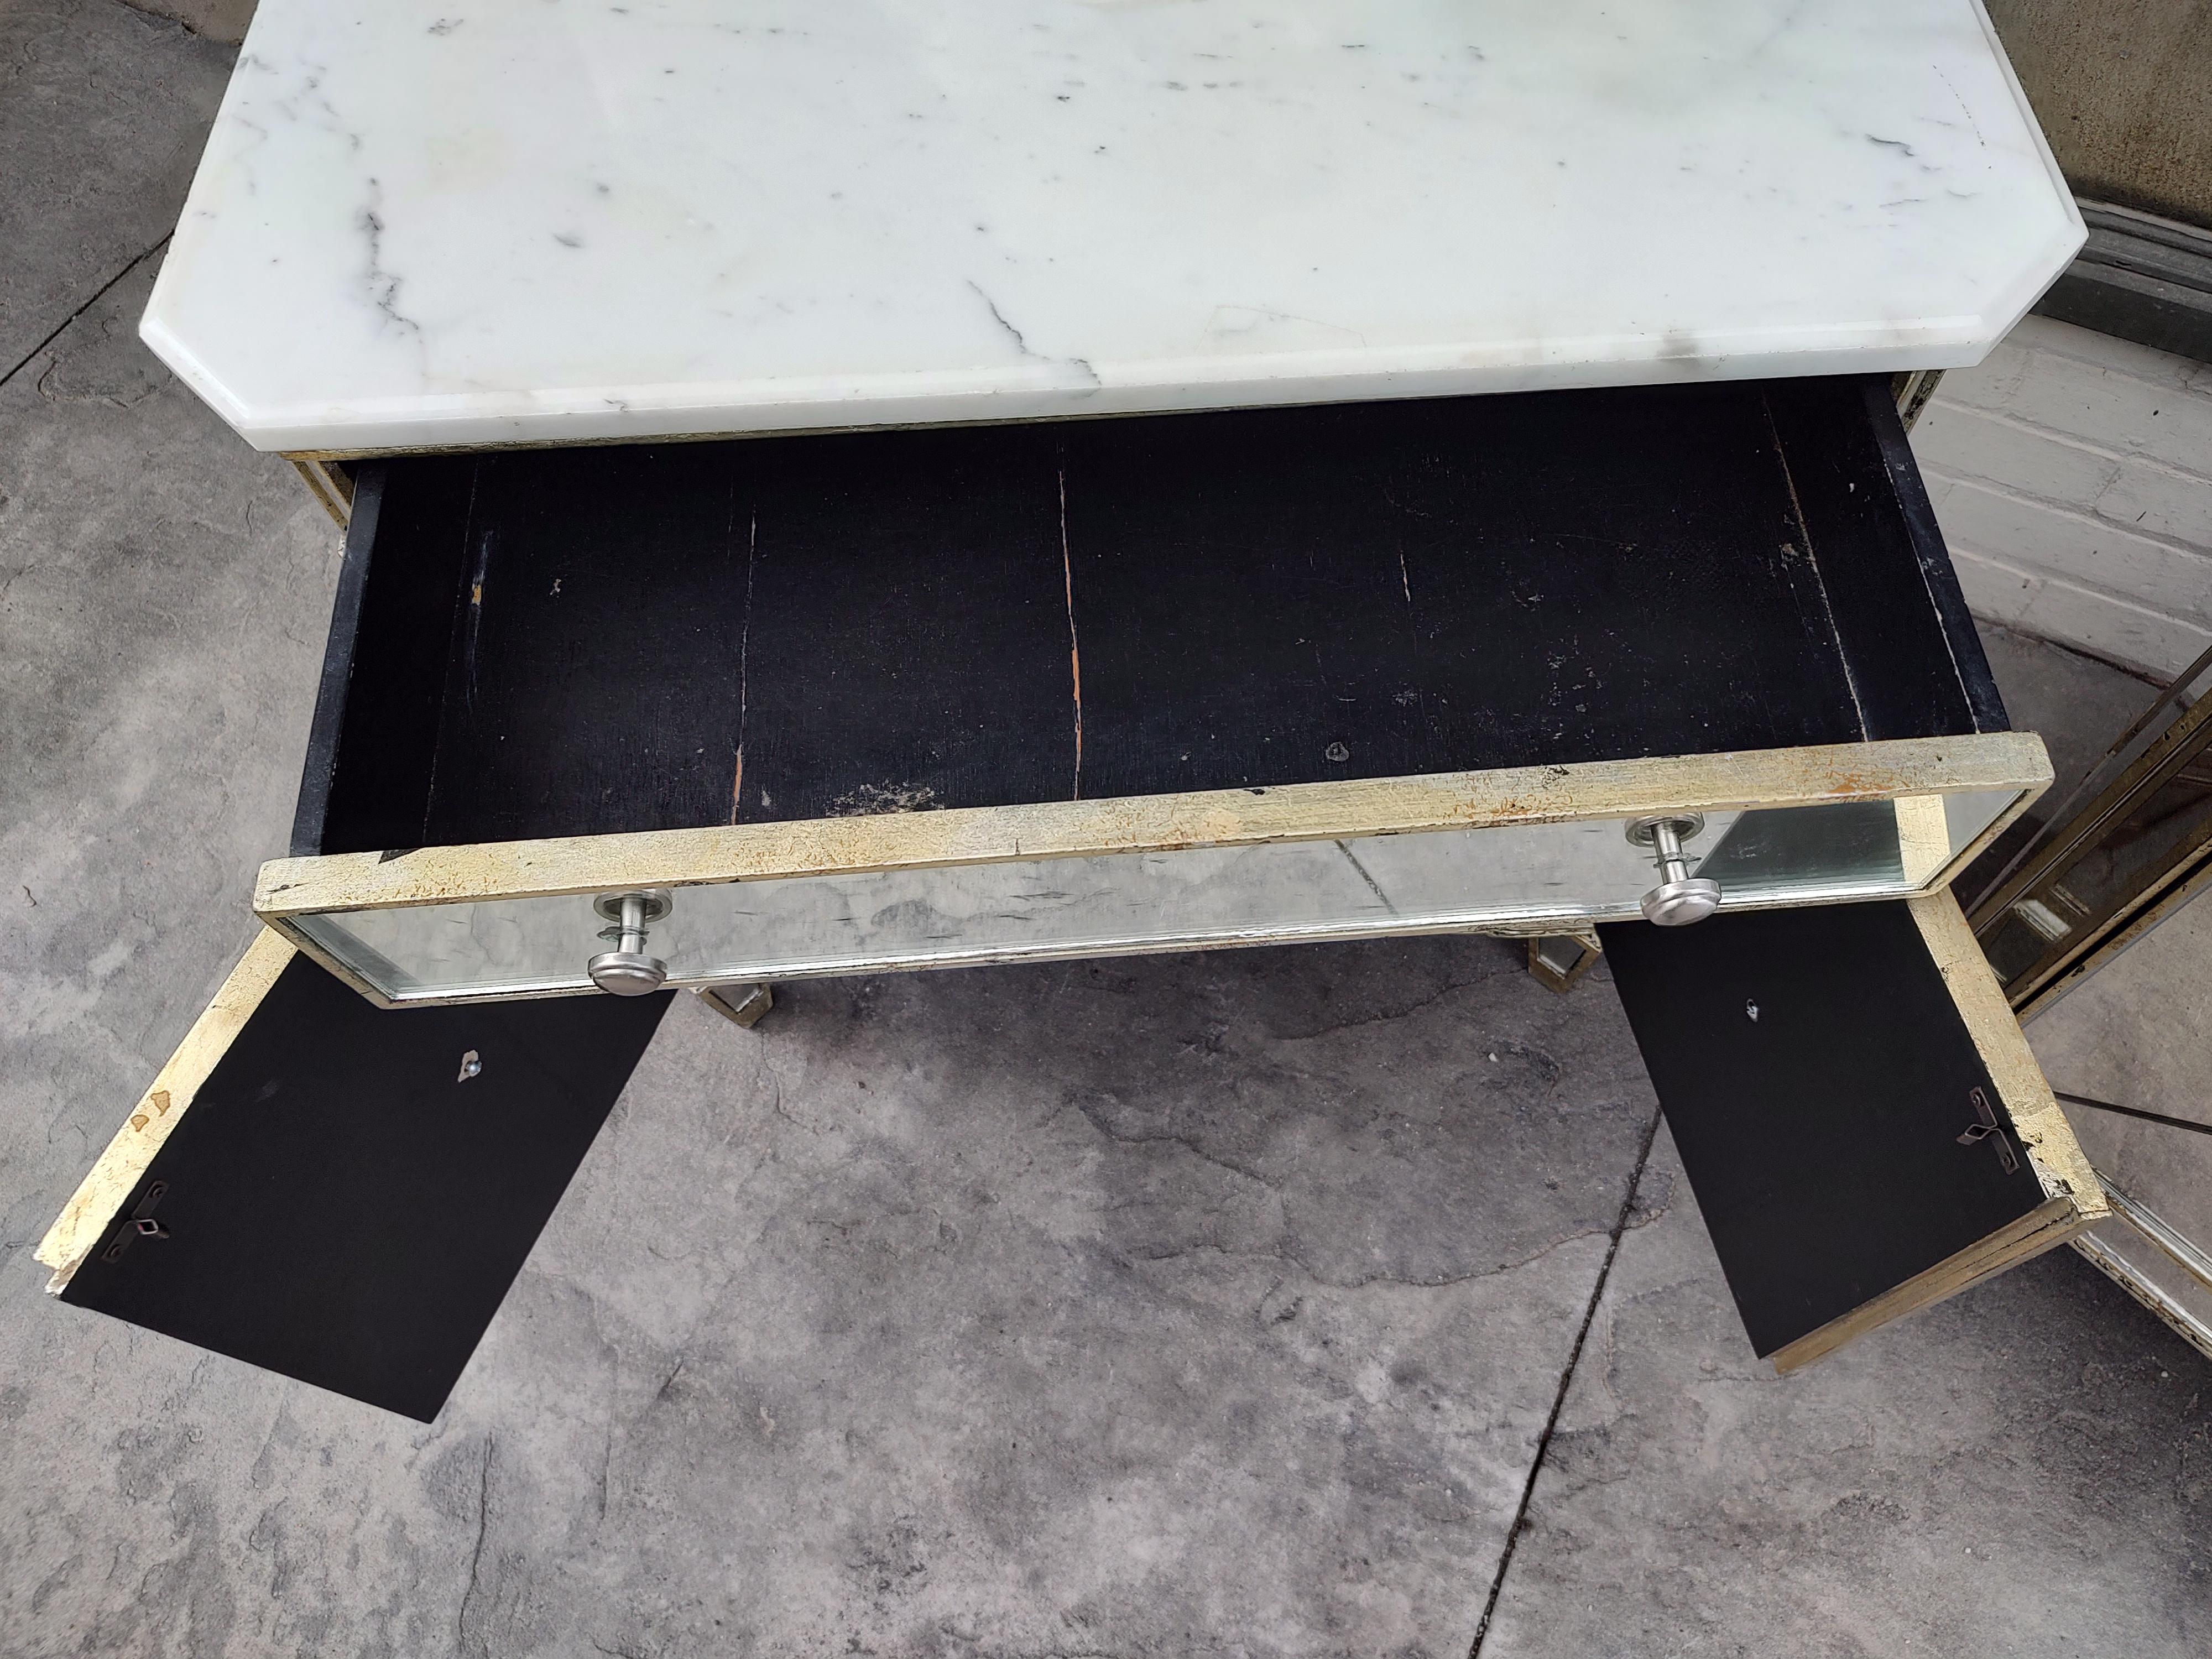 Fabulous pair of Hollywood Regency mirrored night tables with marble tops. One drawer over 2 doors for storage. In very good condition with minimal wear, some rings to the marble see pics or the video. Stainless hardware. Sold as a set.